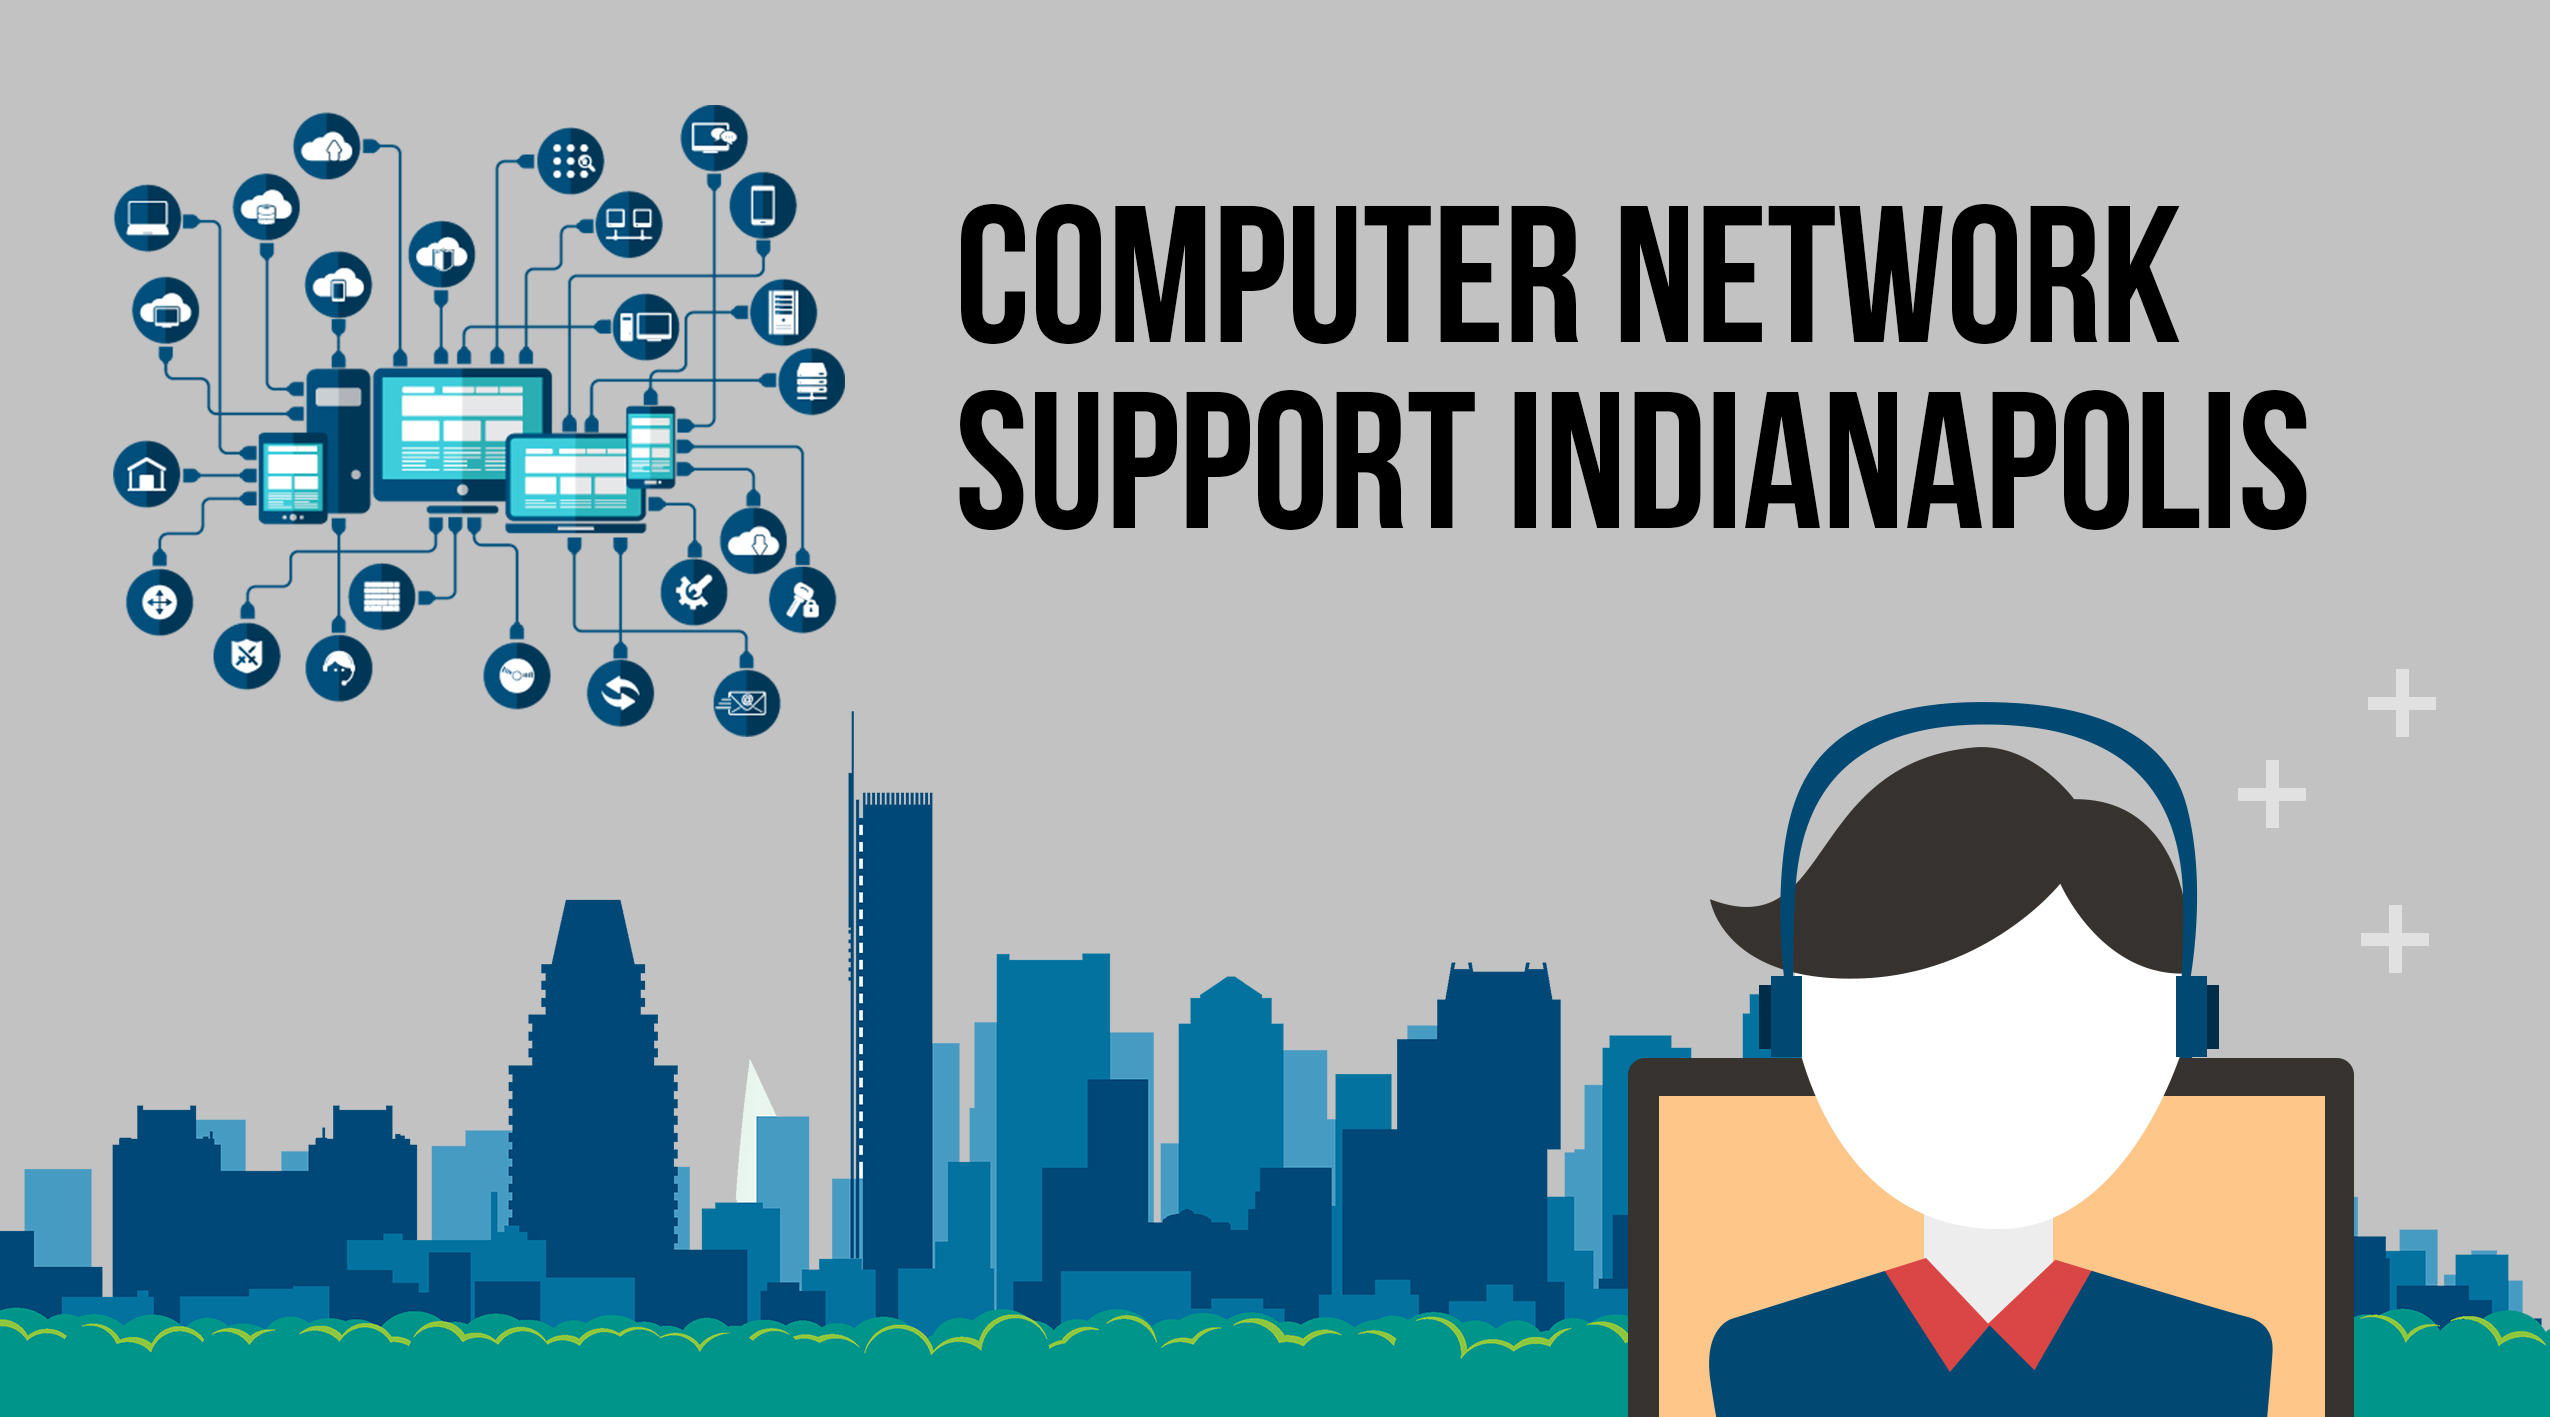 Computer Network Support Indianapolis and surrounding areas